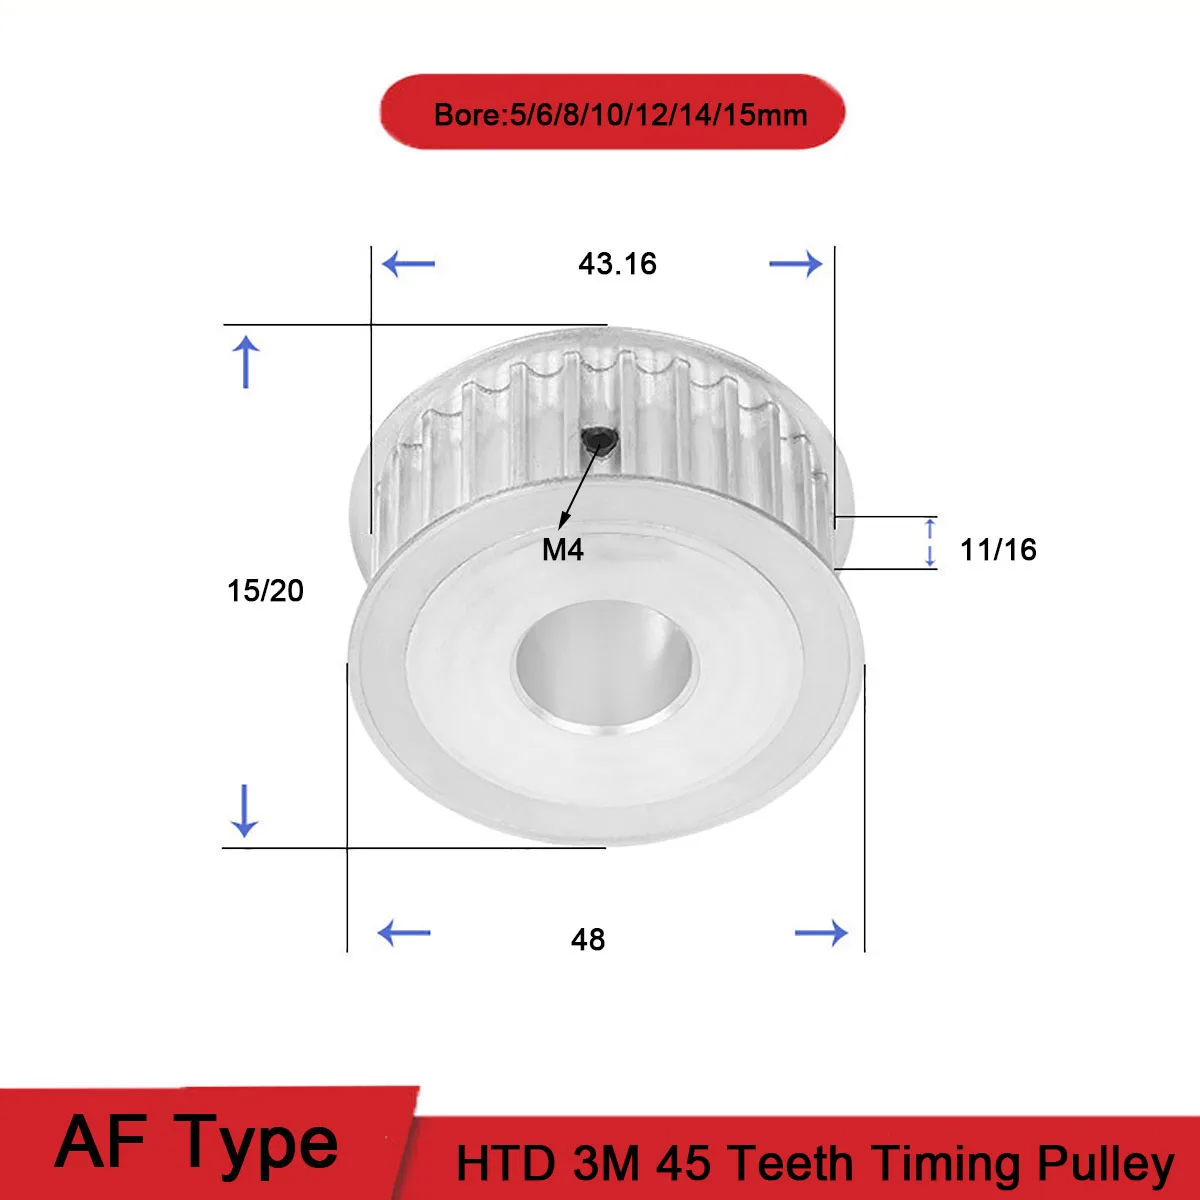 

HTD 3M 45 Teeth Timing Pulley Bore 5~15mm Gear Pulley 3mm Pitch Teeth Width 11mm 16mm Aluminum Synchronous Timing Belt Pulley